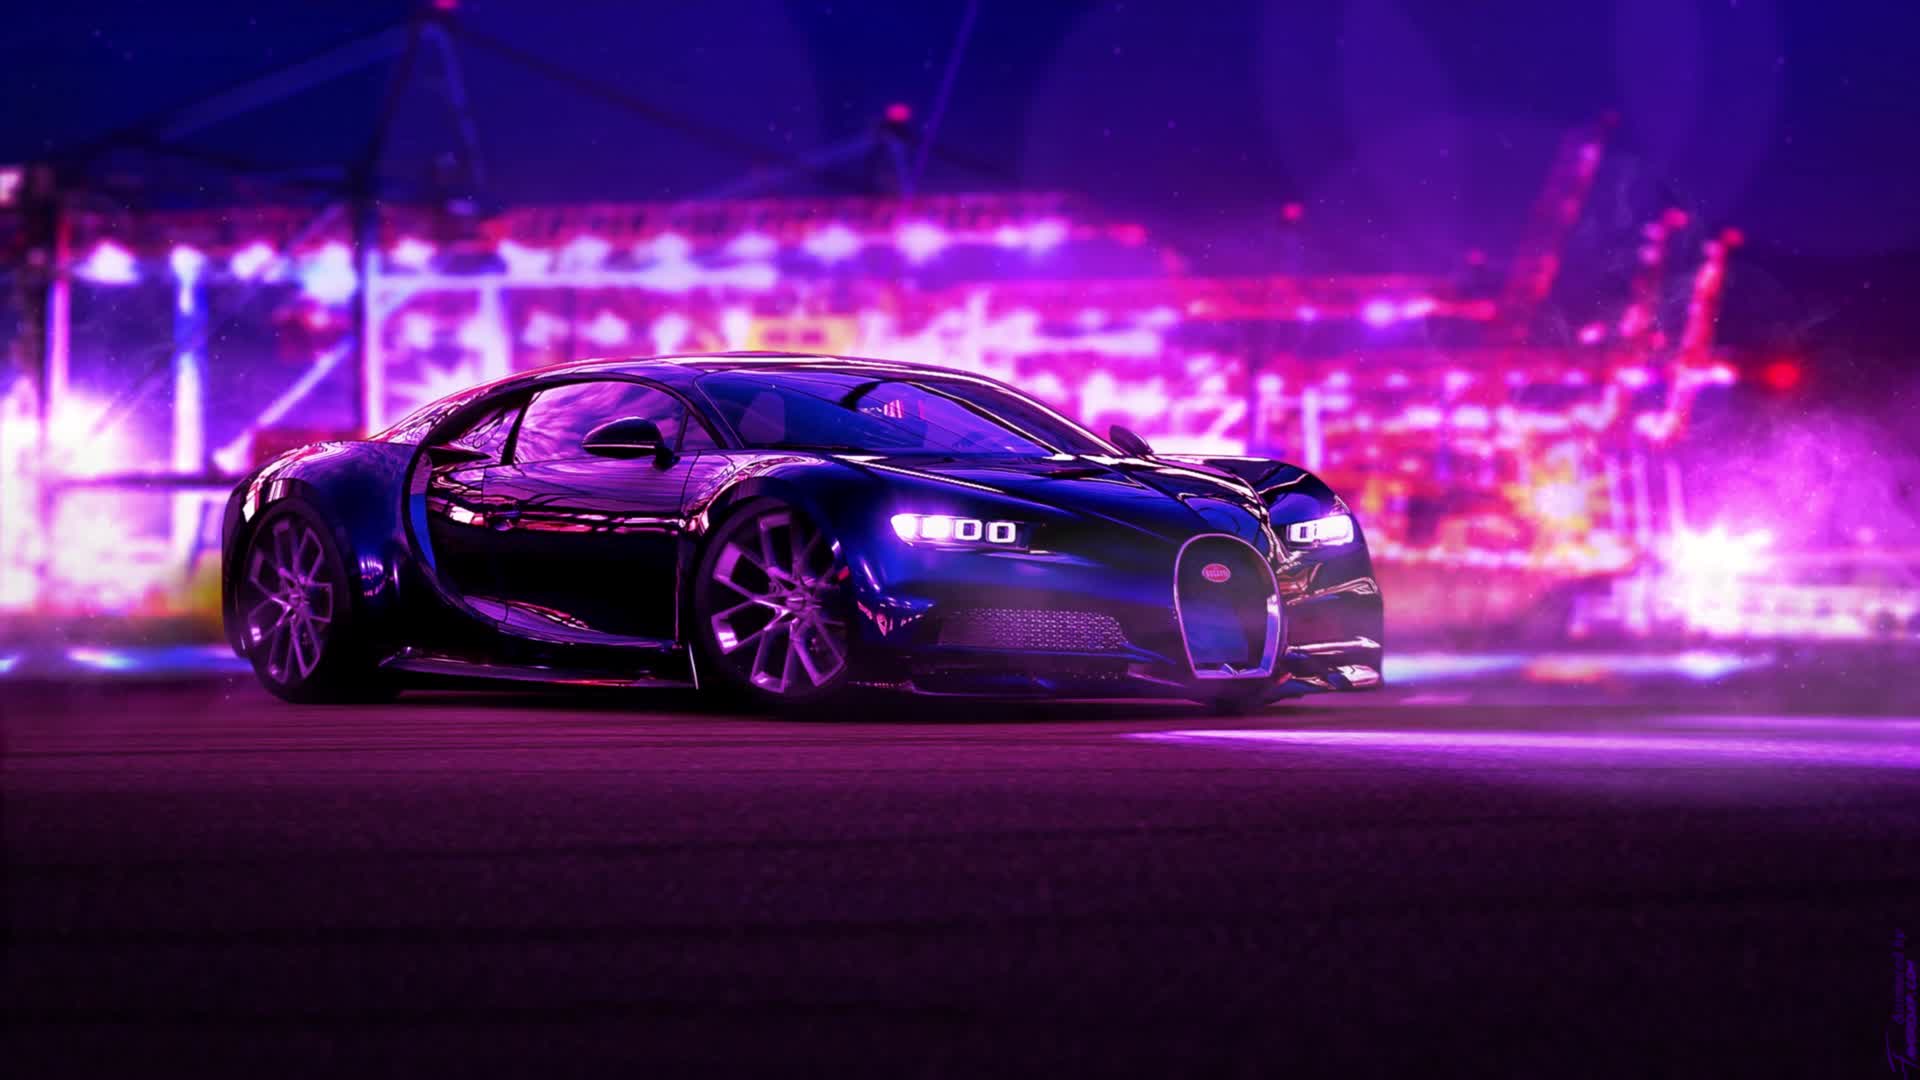 Download wallpaper 1080x2160 luxury car, red, bugatti chiron, honor 7x,  honor 9 lite, honor view 10, 1080x2160 hd background, 19858